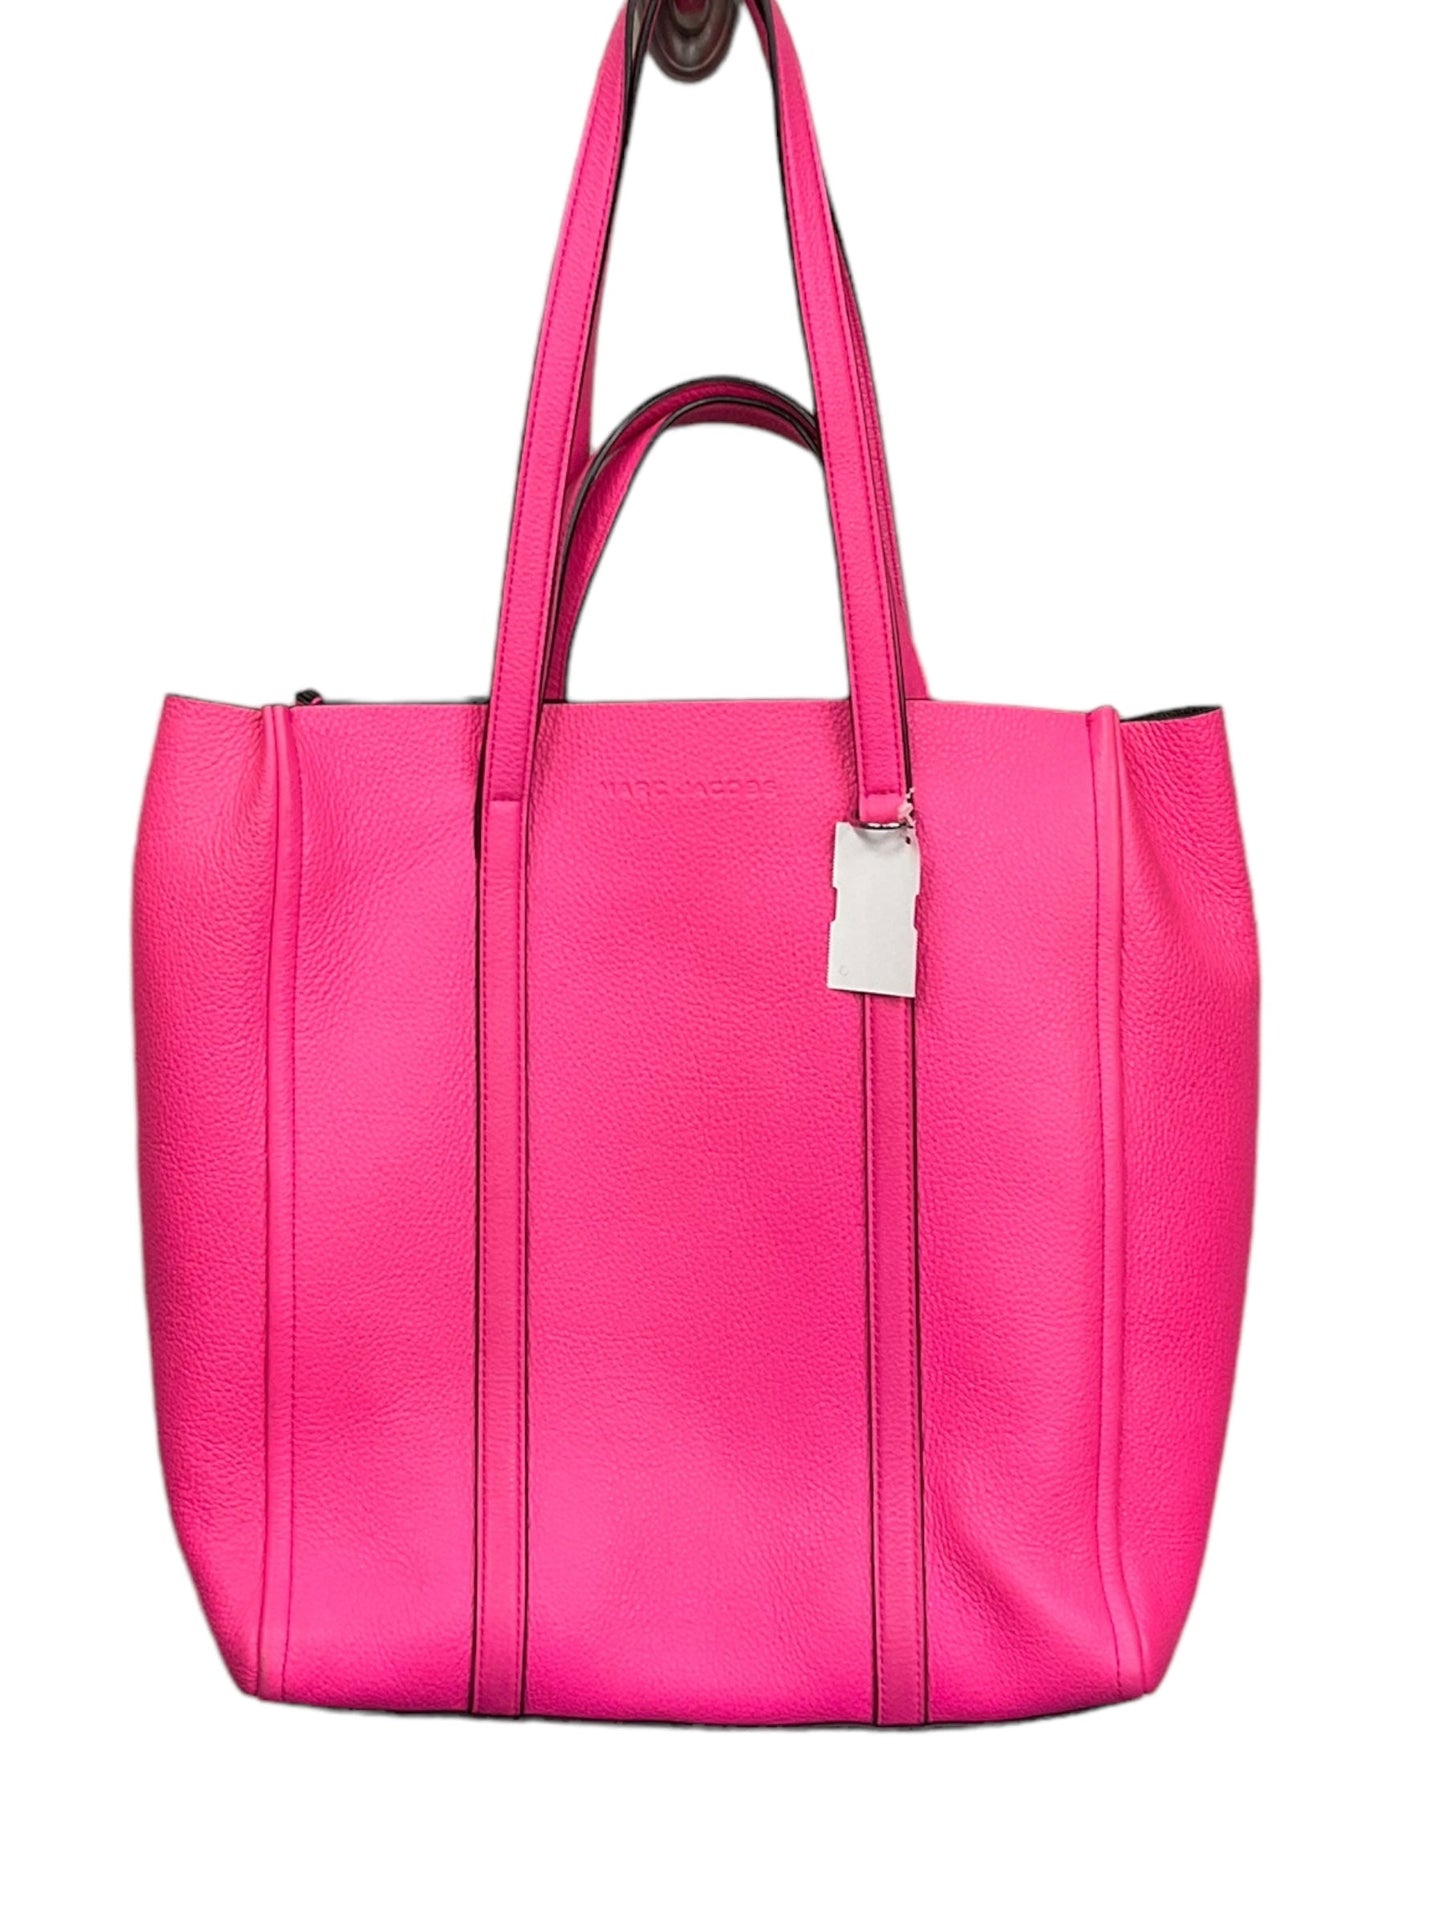 Pink Tote Leather Marc By Marc Jacobs, Size Large